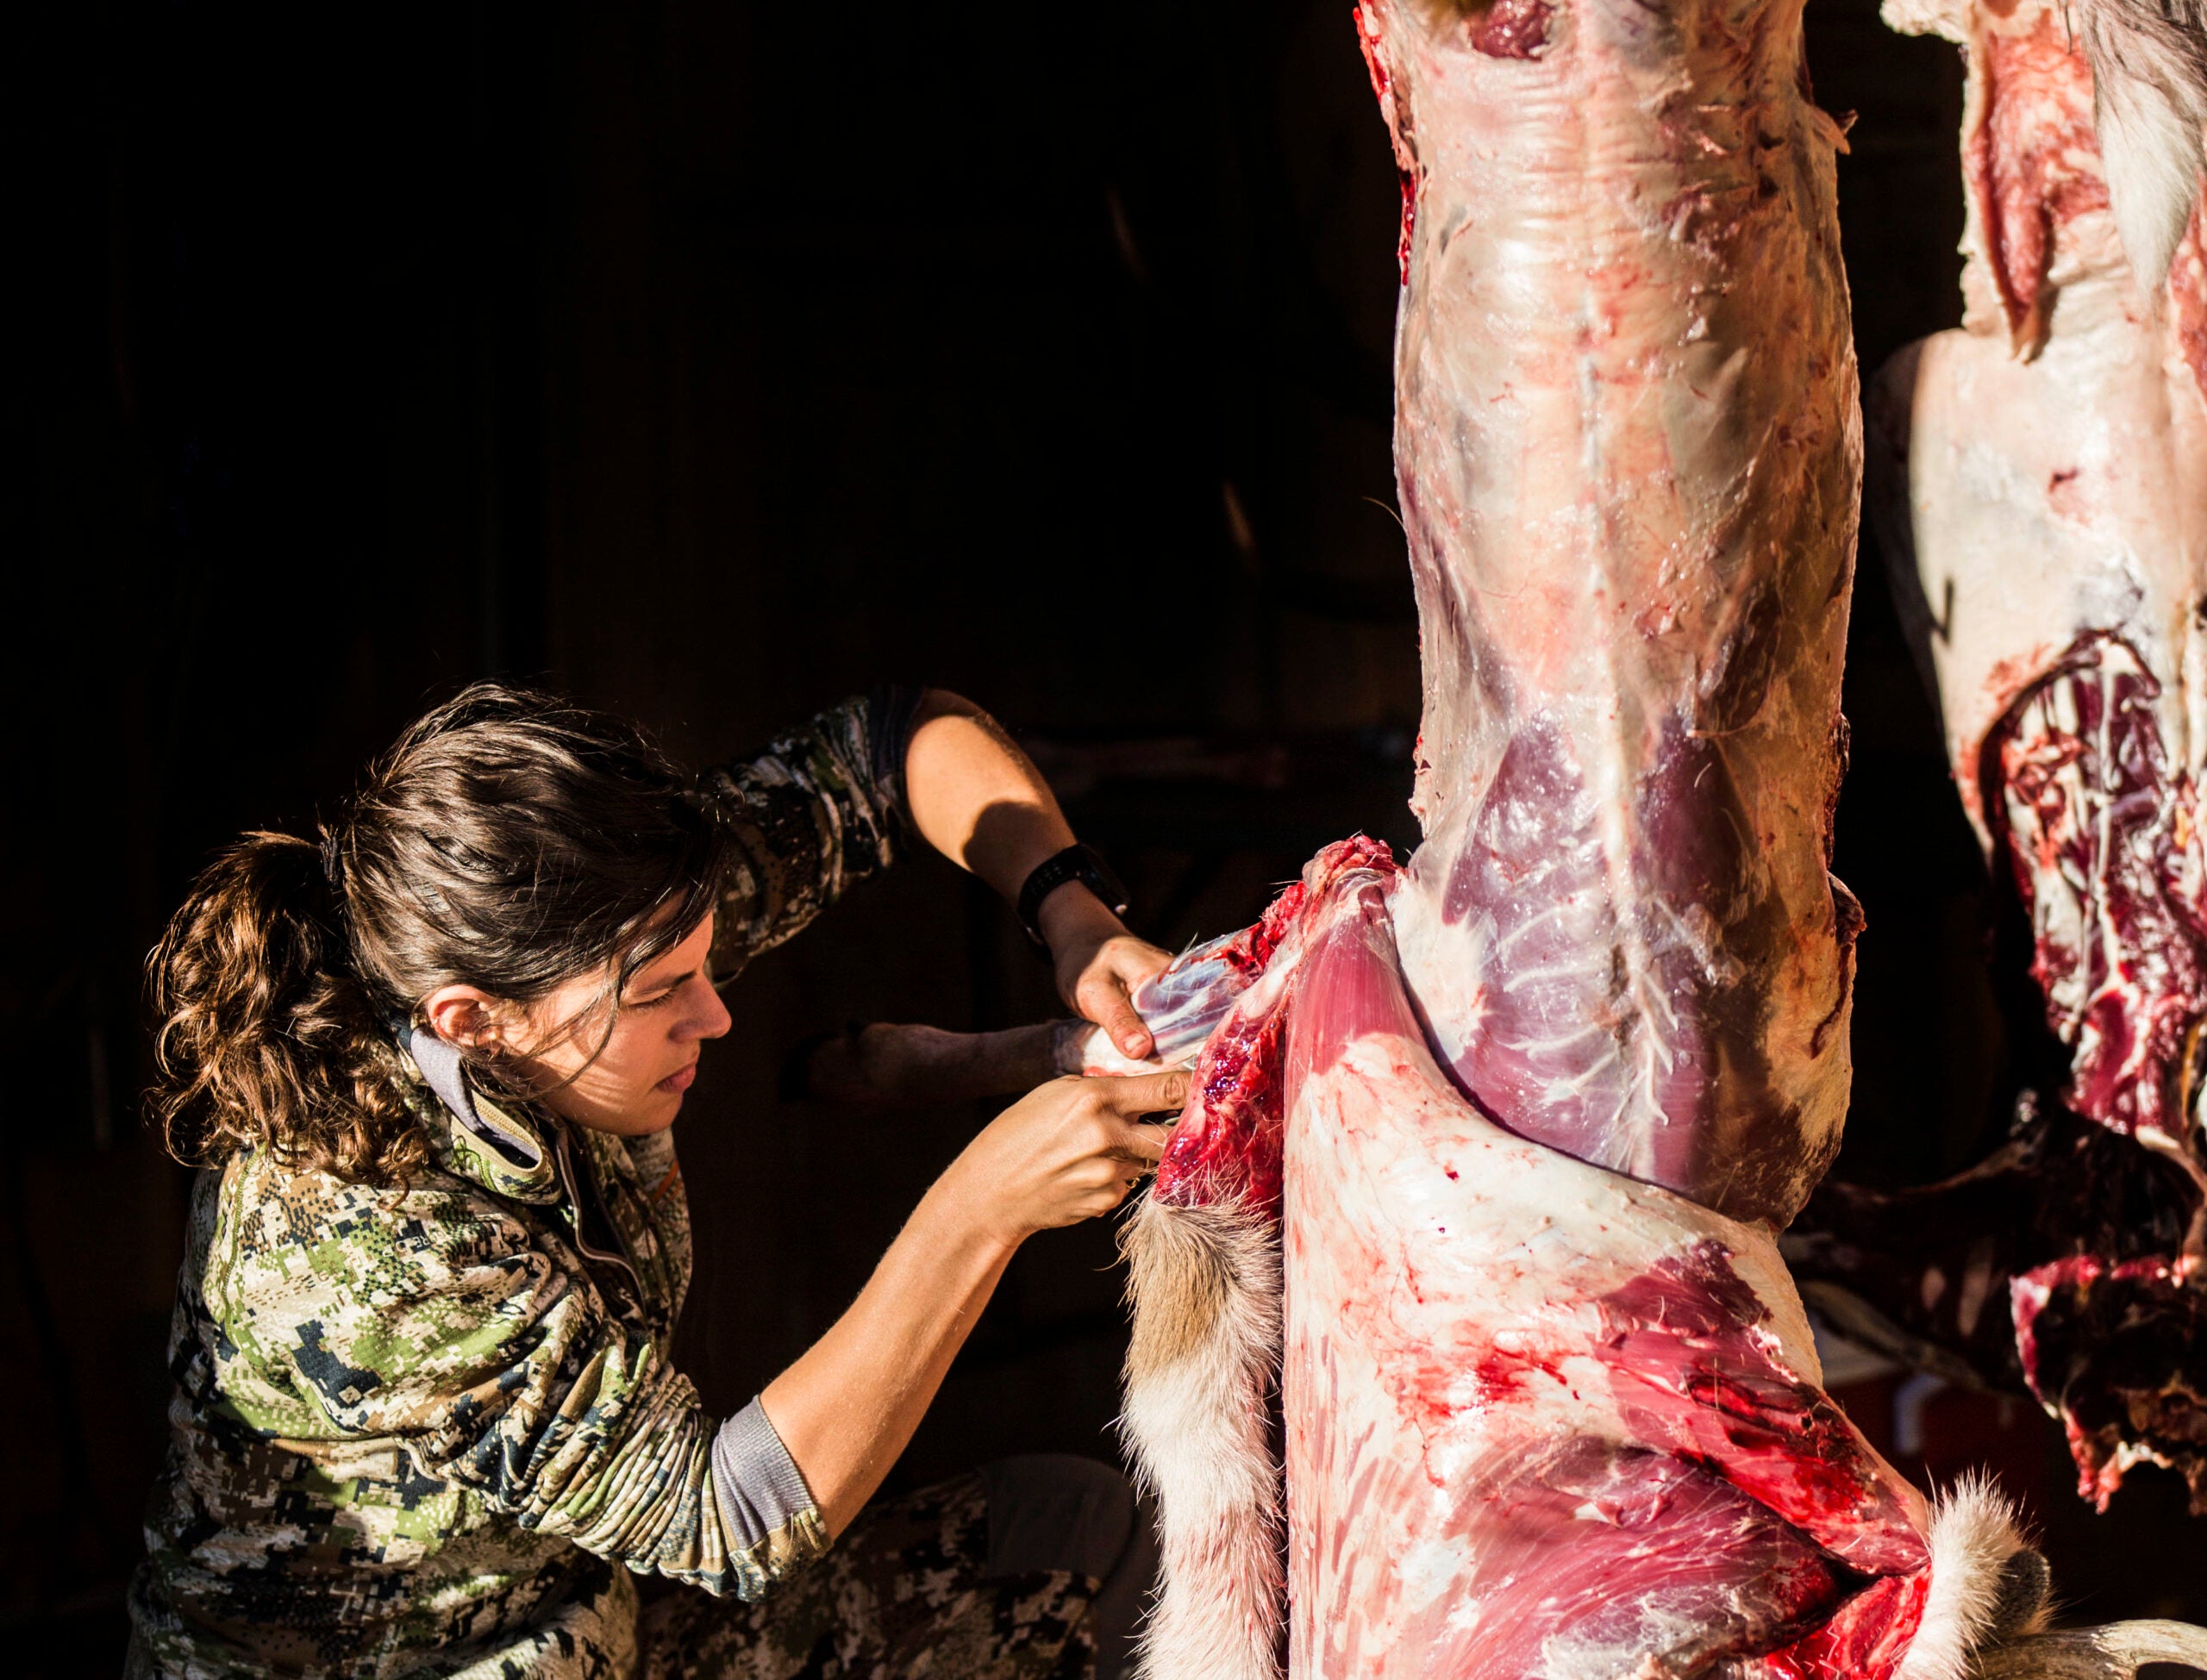 Learning how to skin a deer is relatively easy, all you need is a sharp knife.